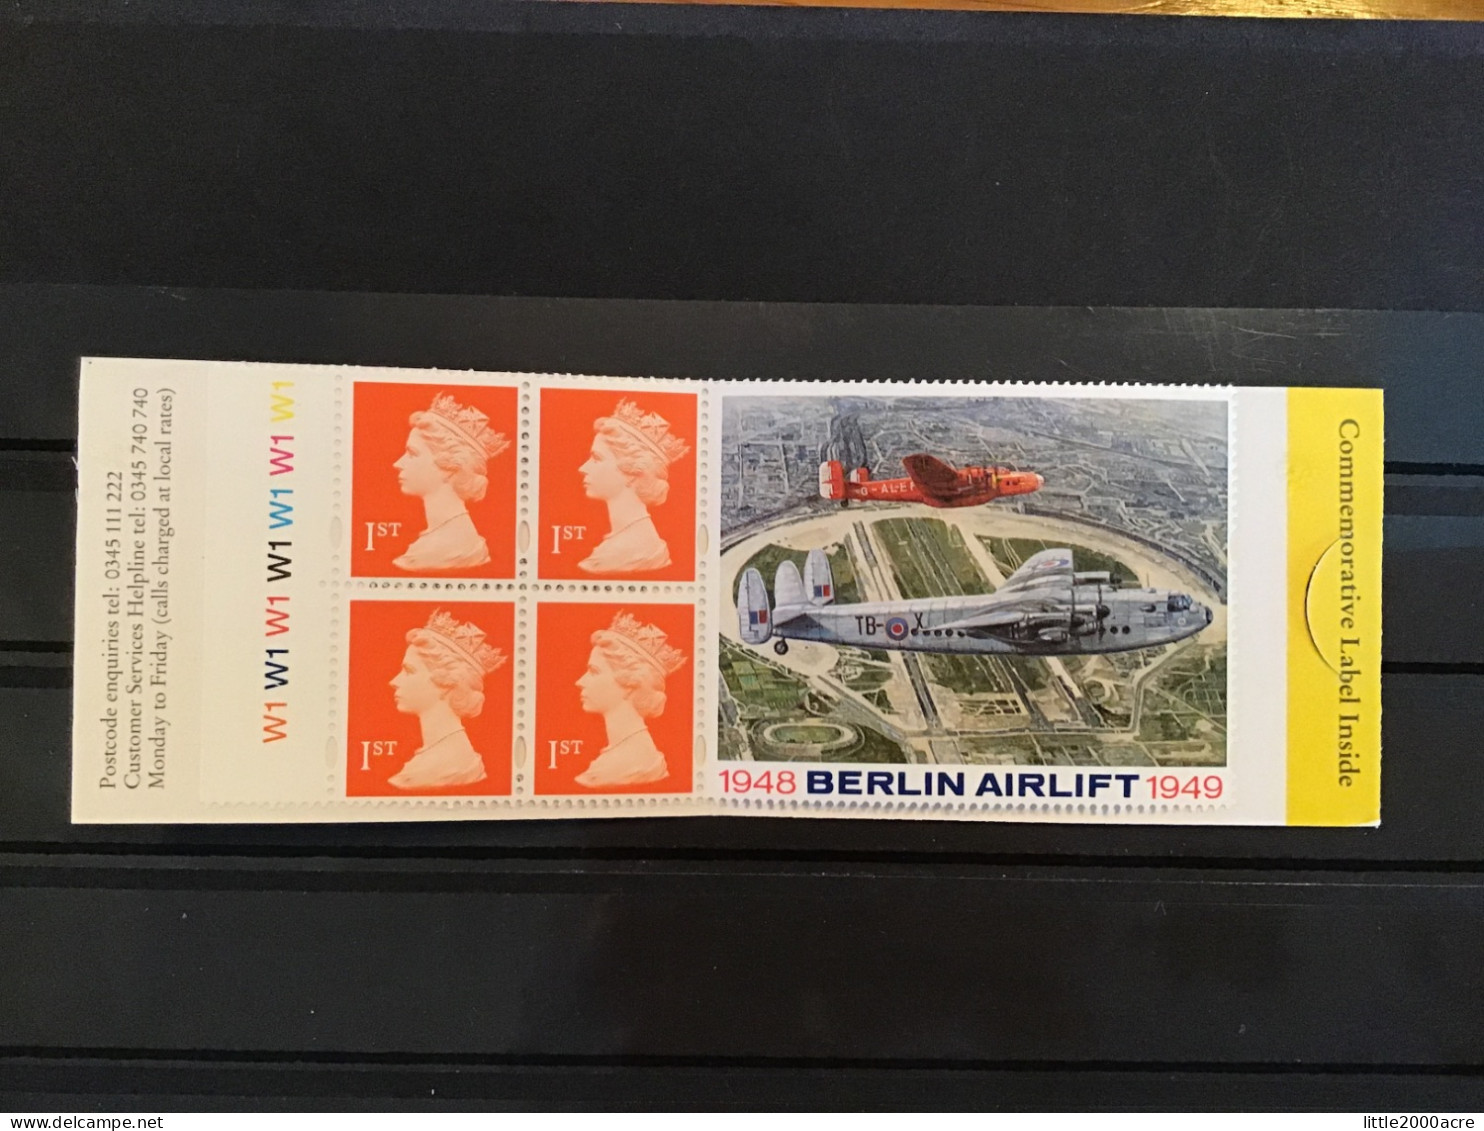 GB 1999 4 1st Class Stamps Barcode Booklet £1.04 Berlin Airlift MNH SG HB17 - Cuadernillos